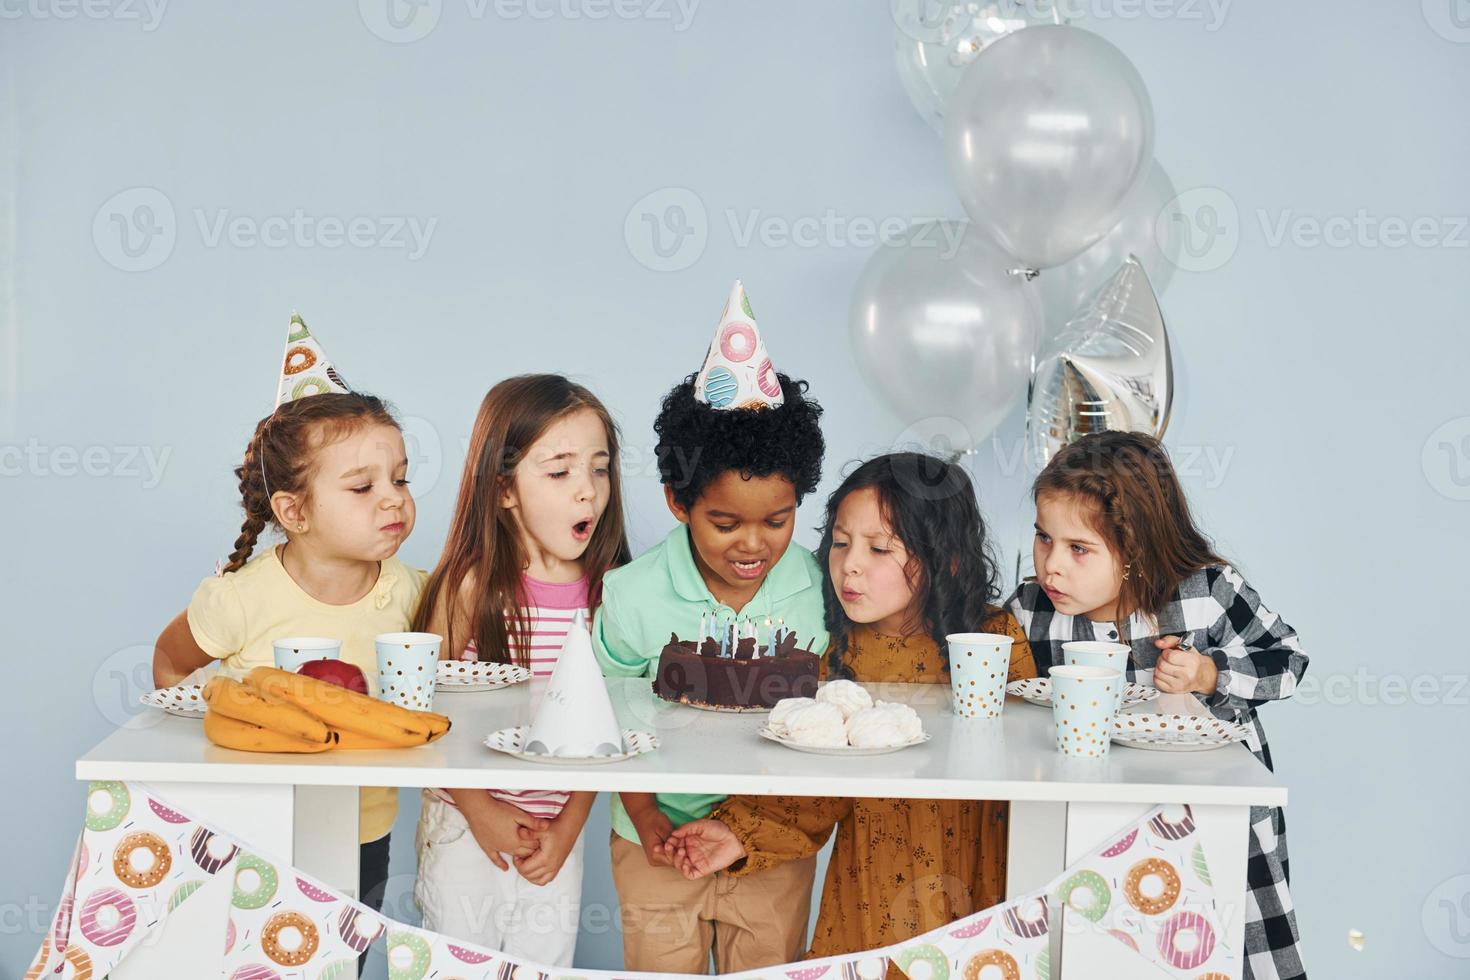 Sits by the table. Children on celebrating birthday party indoors have fun together photo